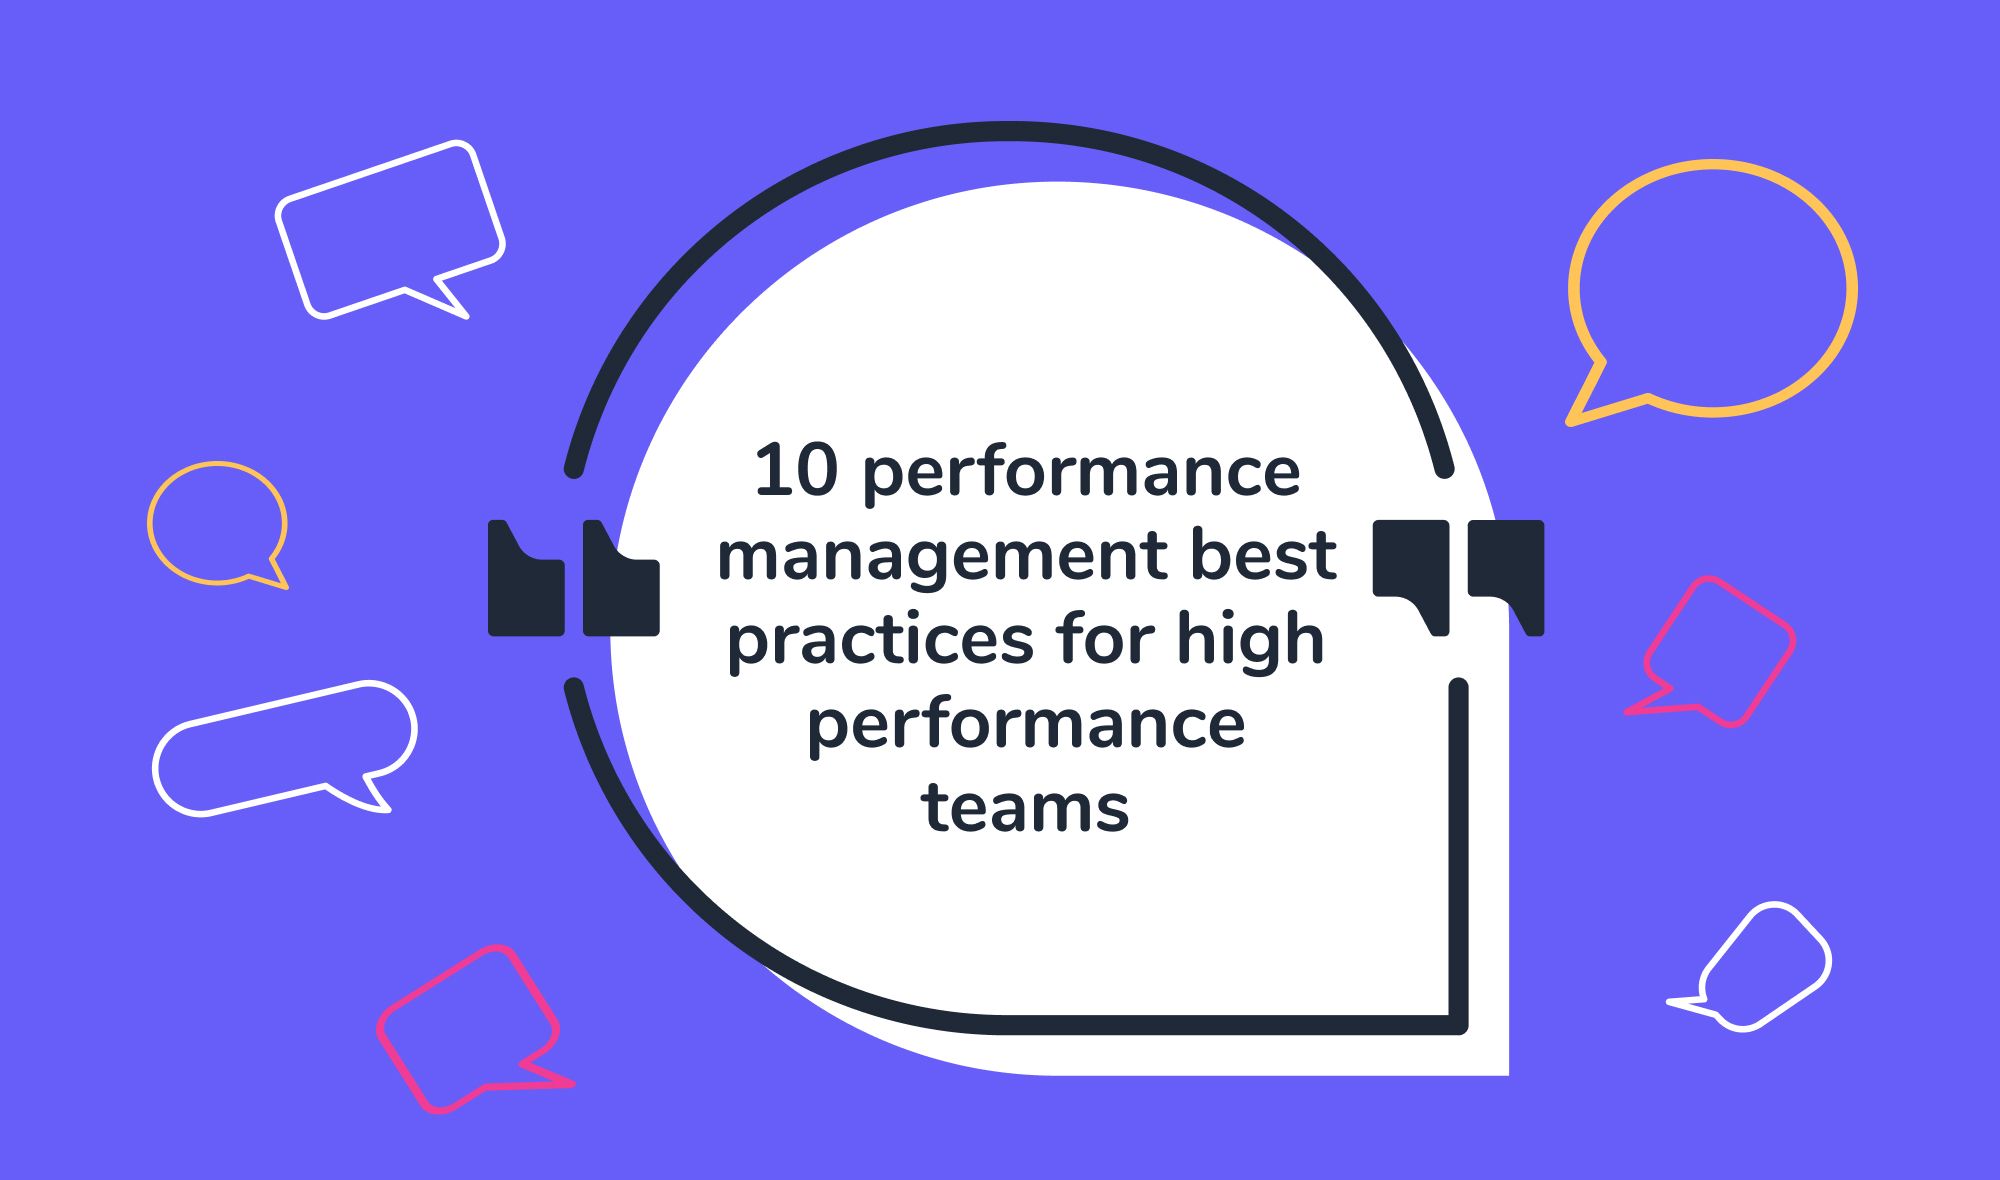 High performance management - 10 performance management best practices for high performance teams